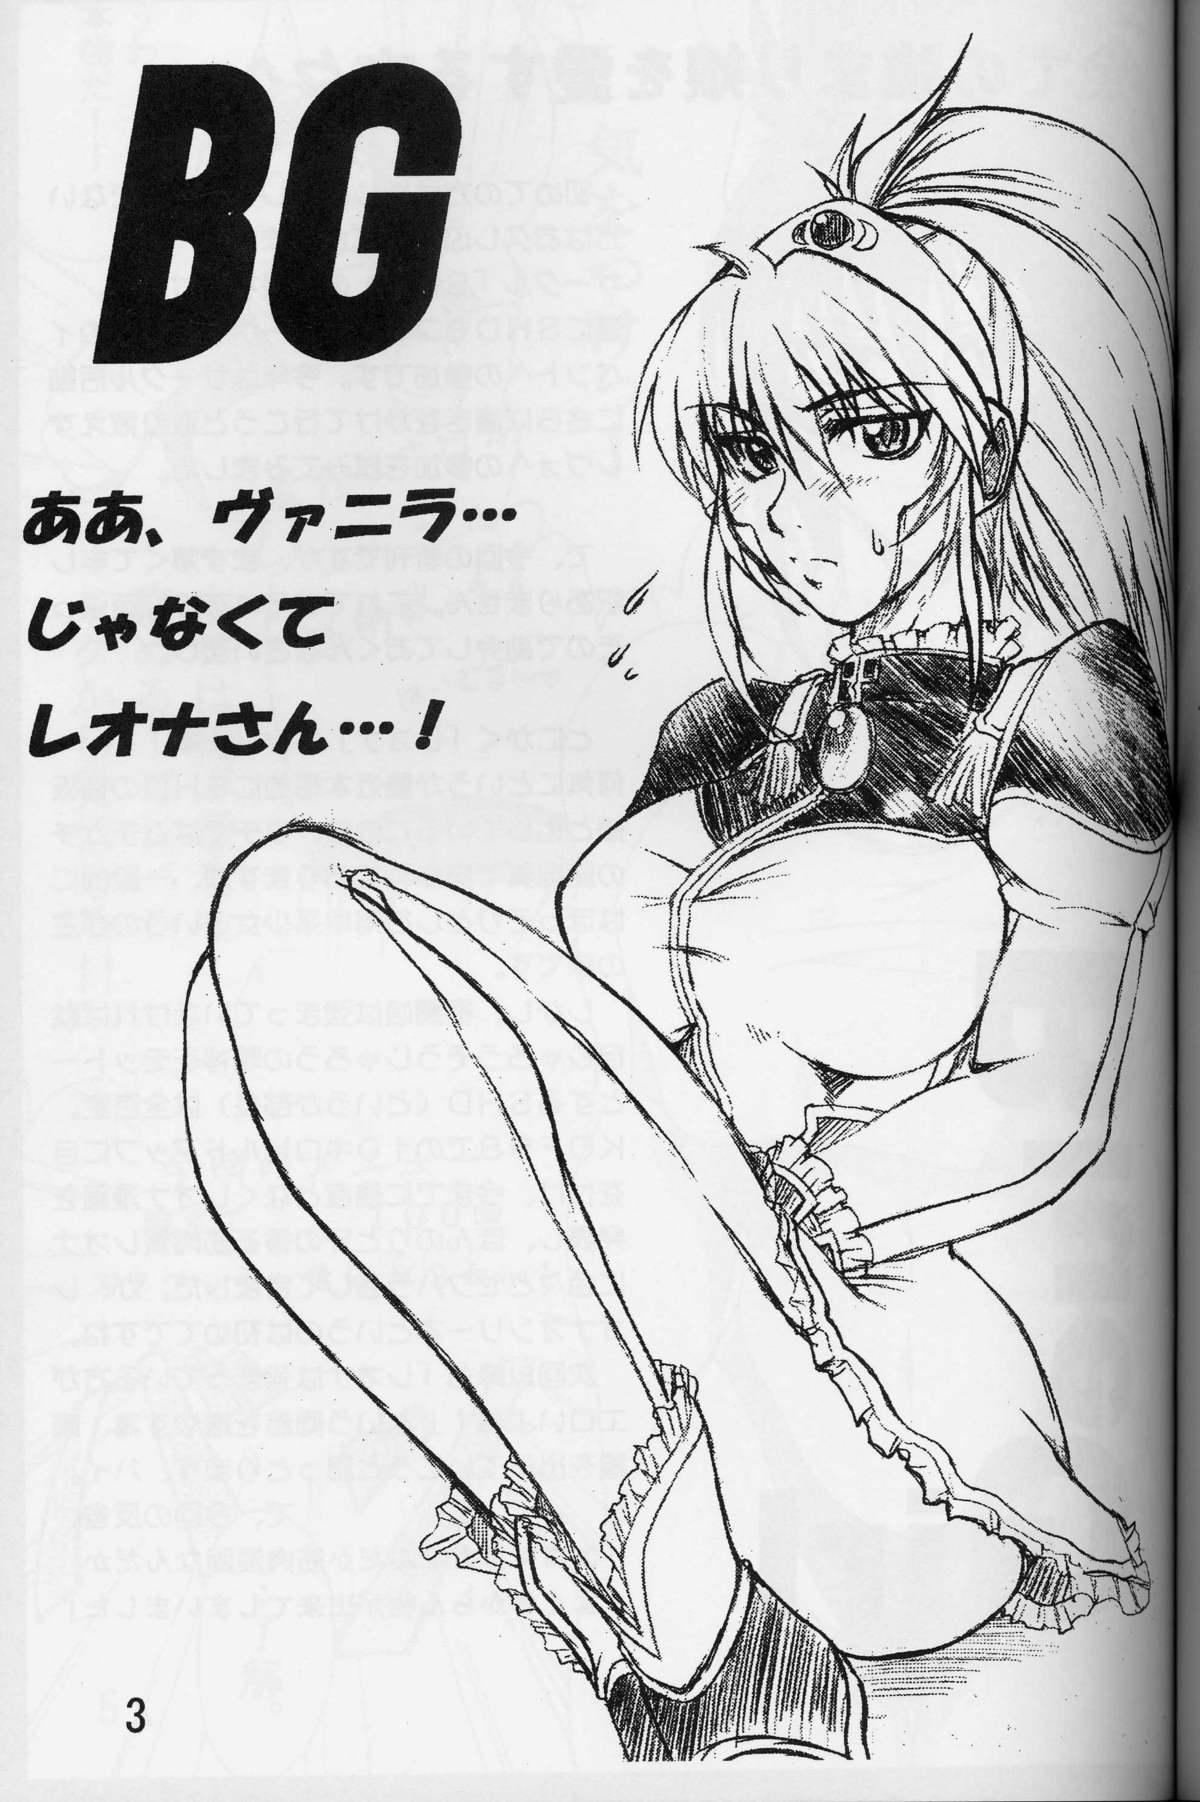 Gilf BG - King of fighters Rabo - Page 3